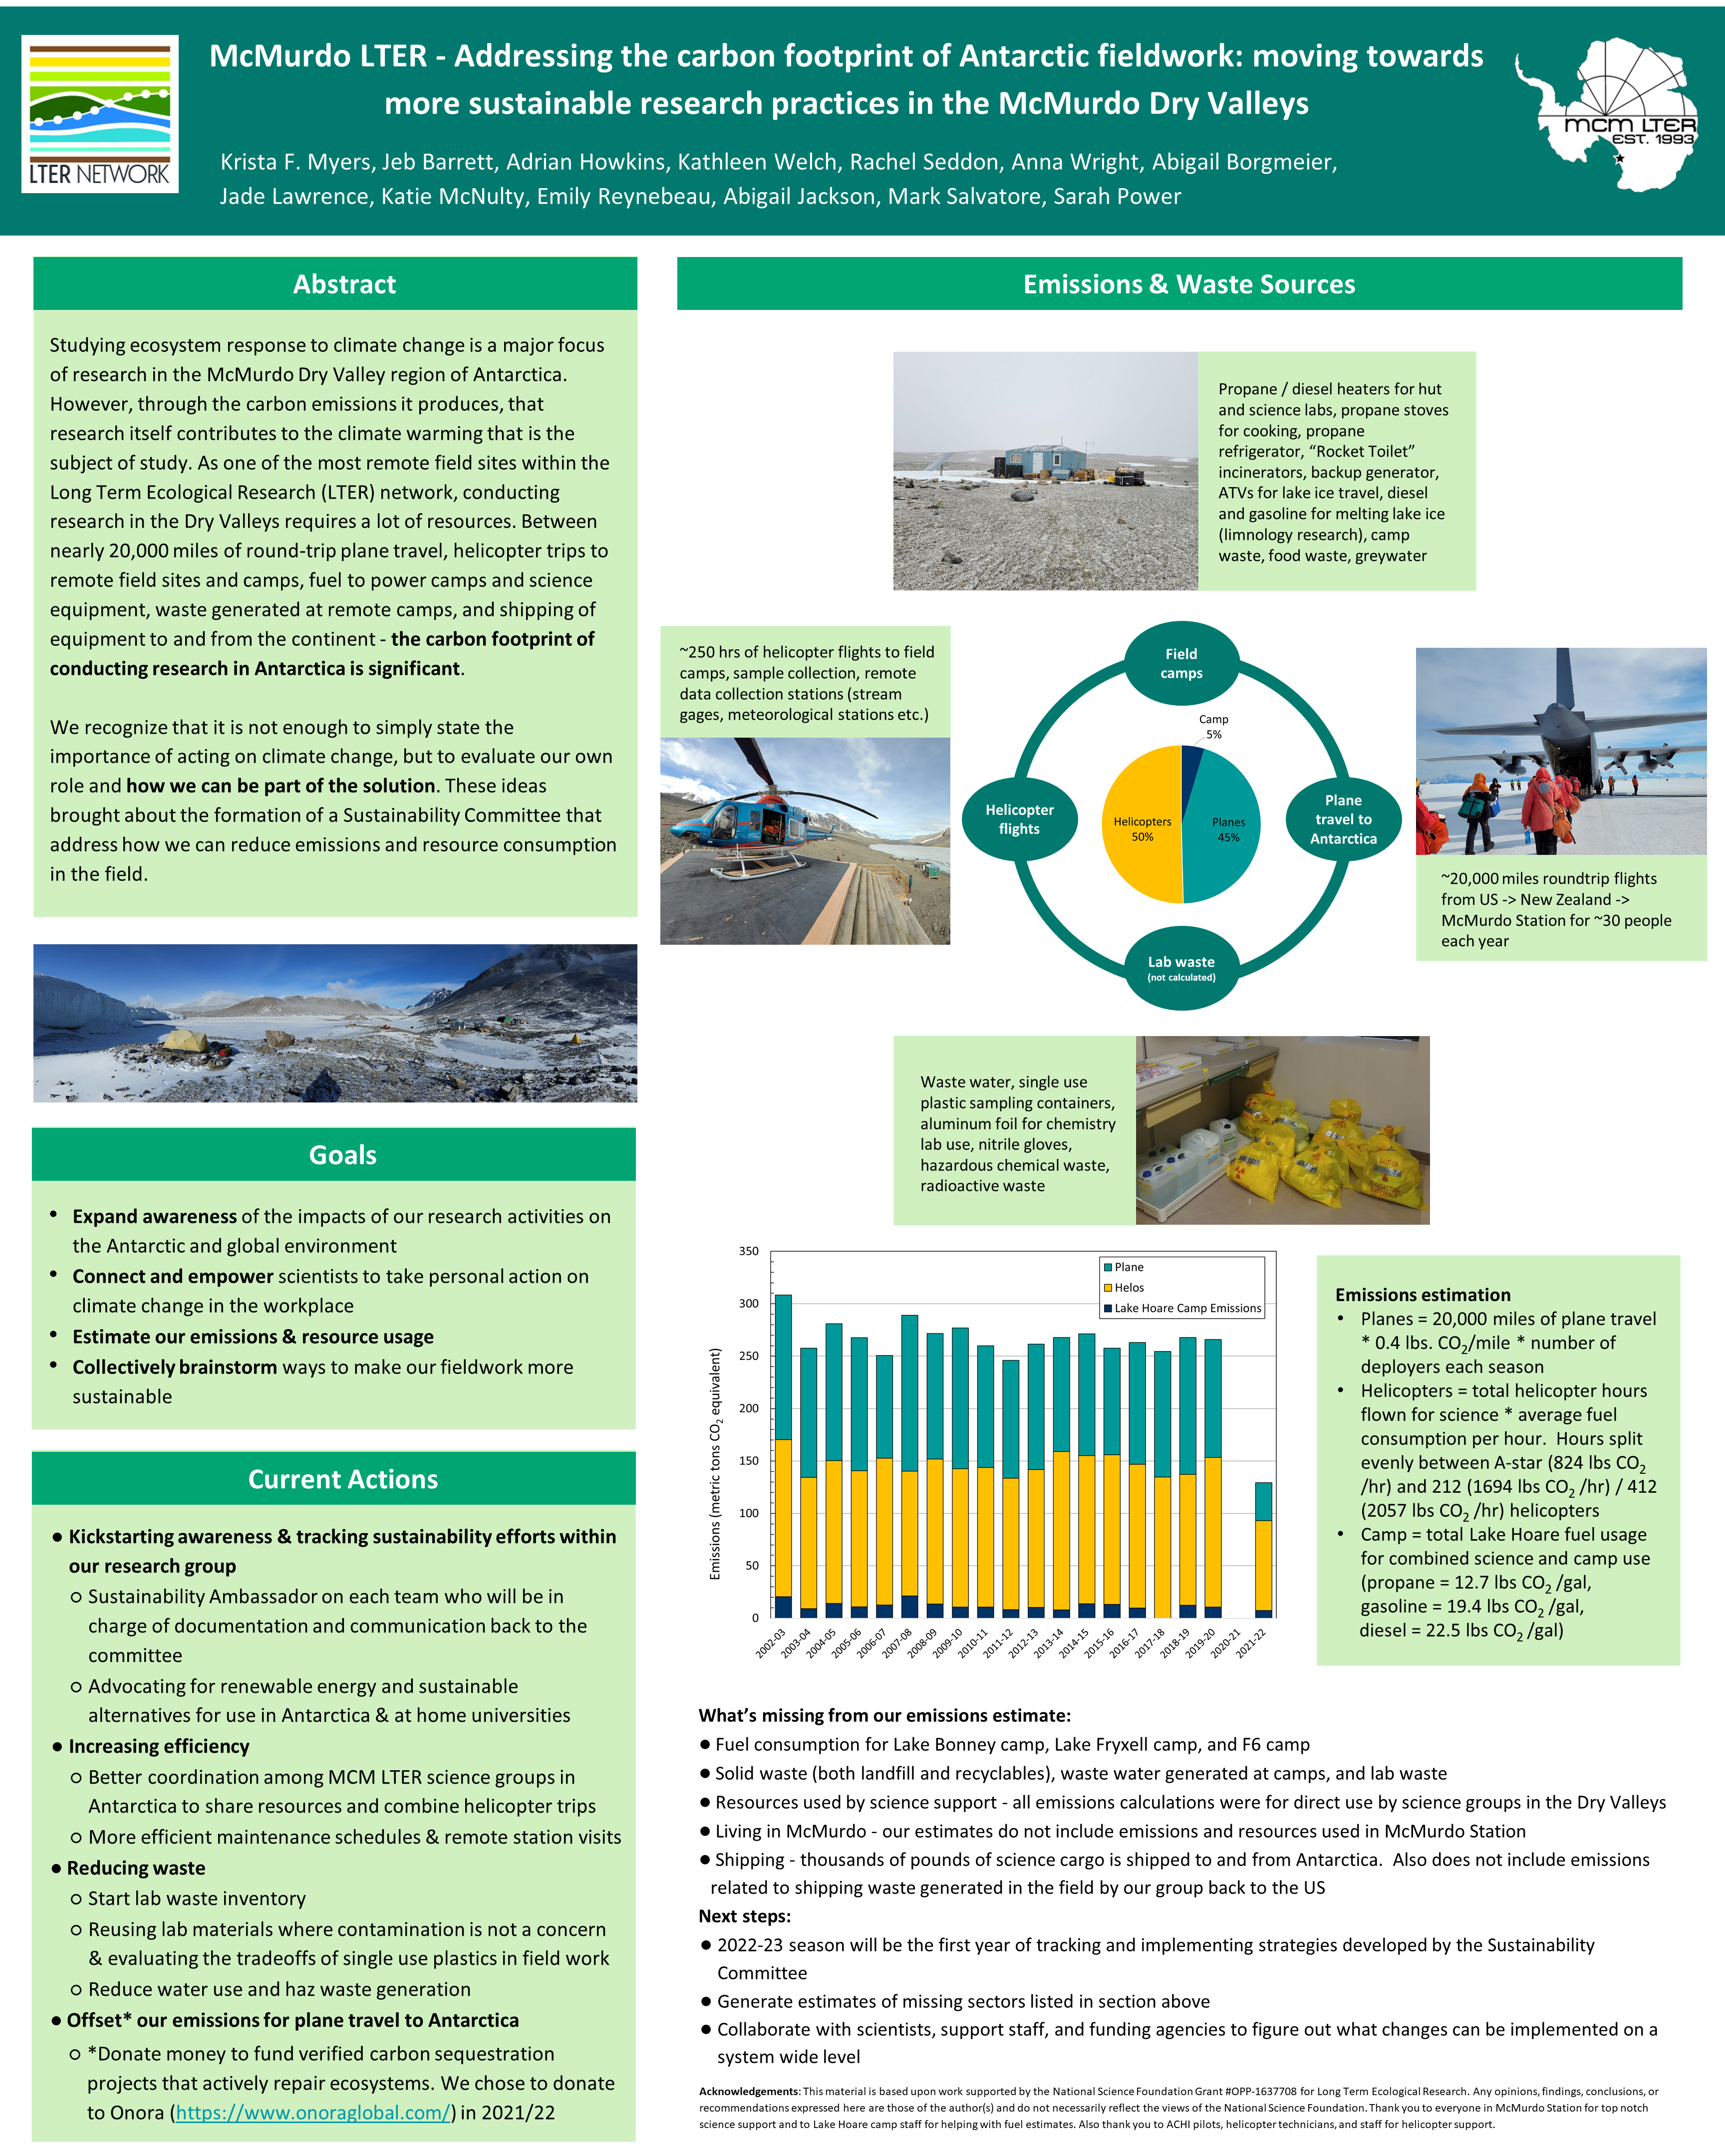 Poster submitted by the Sustainability Committee at the 2022 LTER All Scientists Meeting